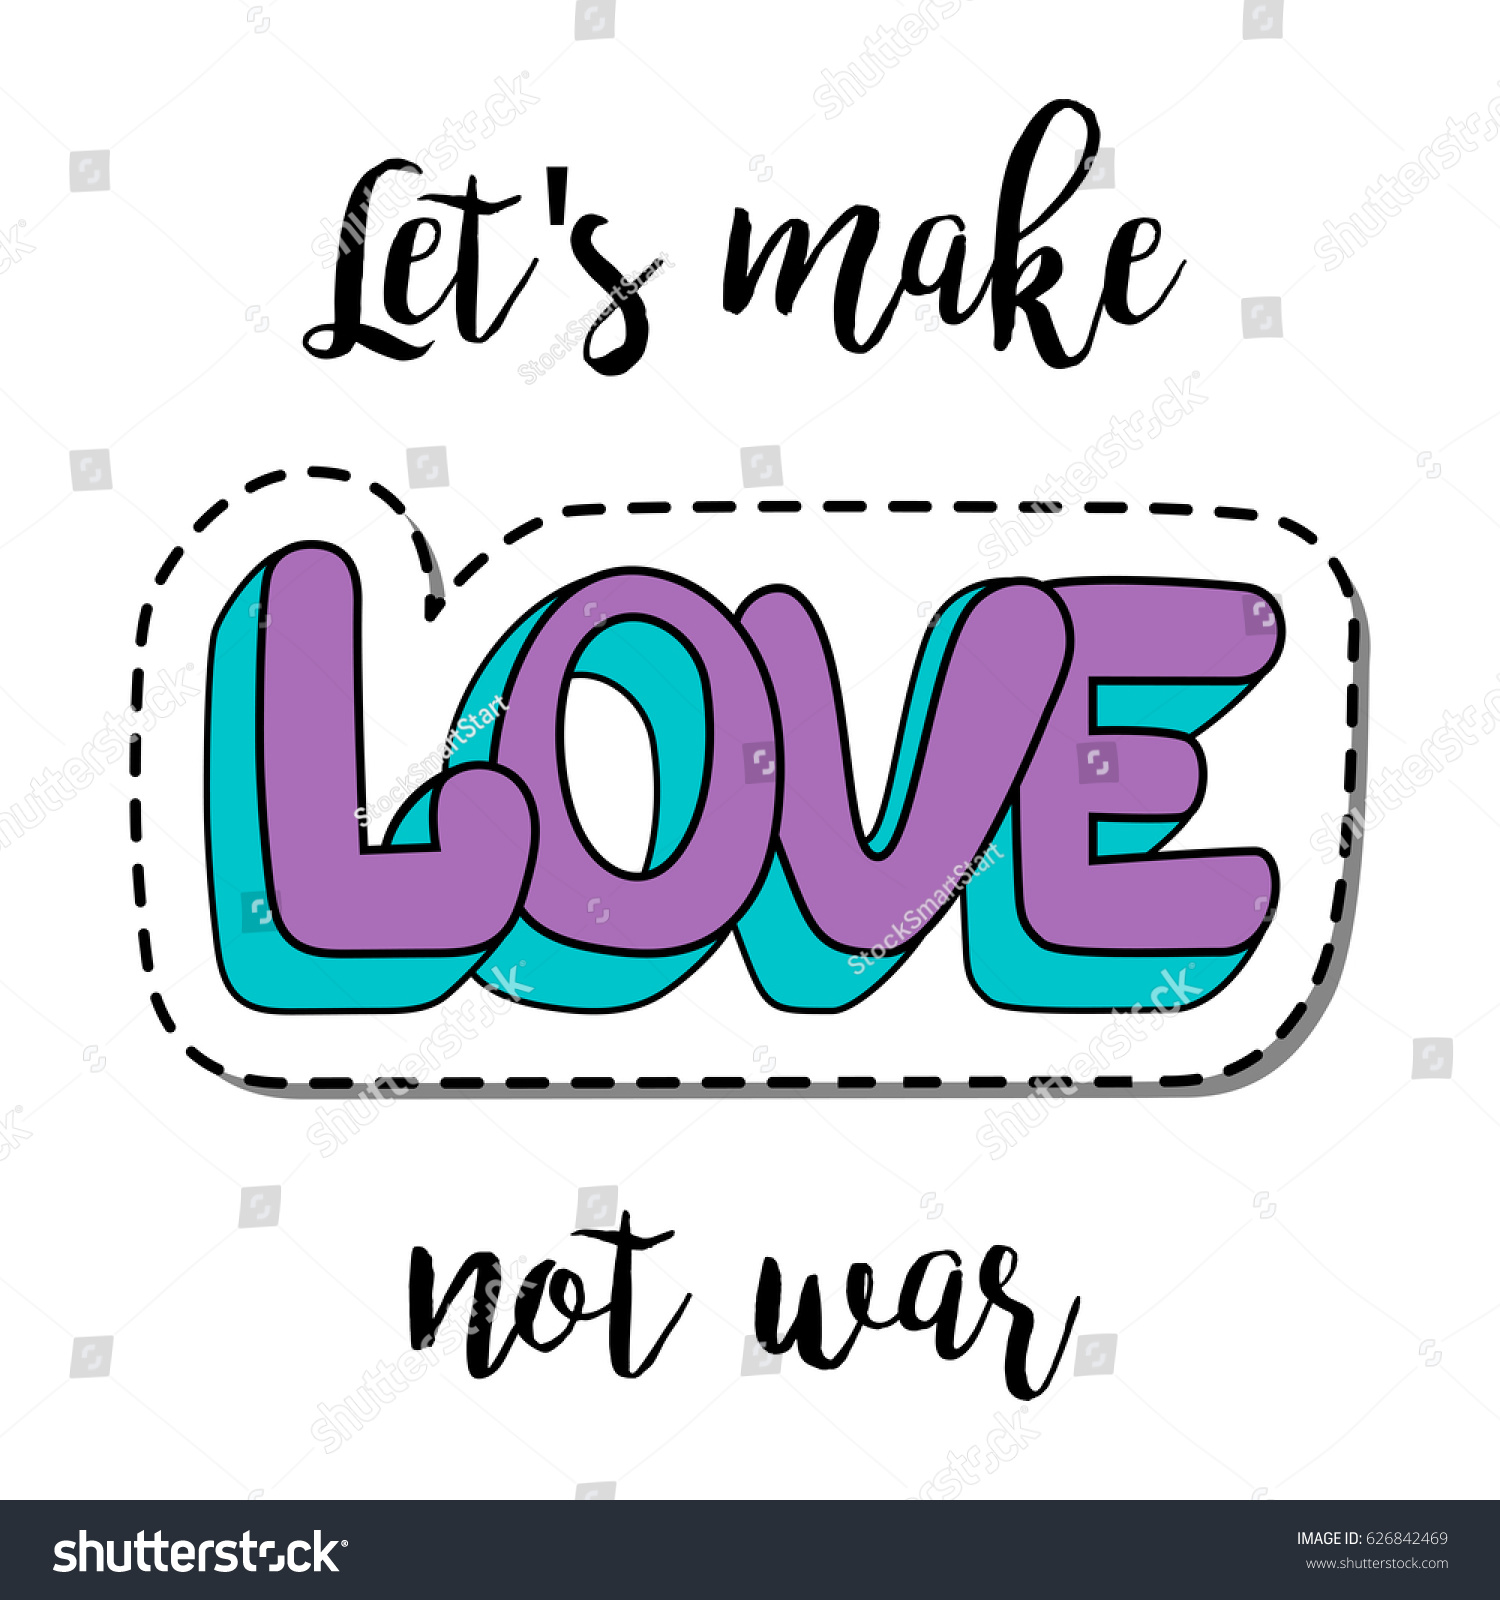 Fashion patch element with quote Lets make love not war Vector illustration